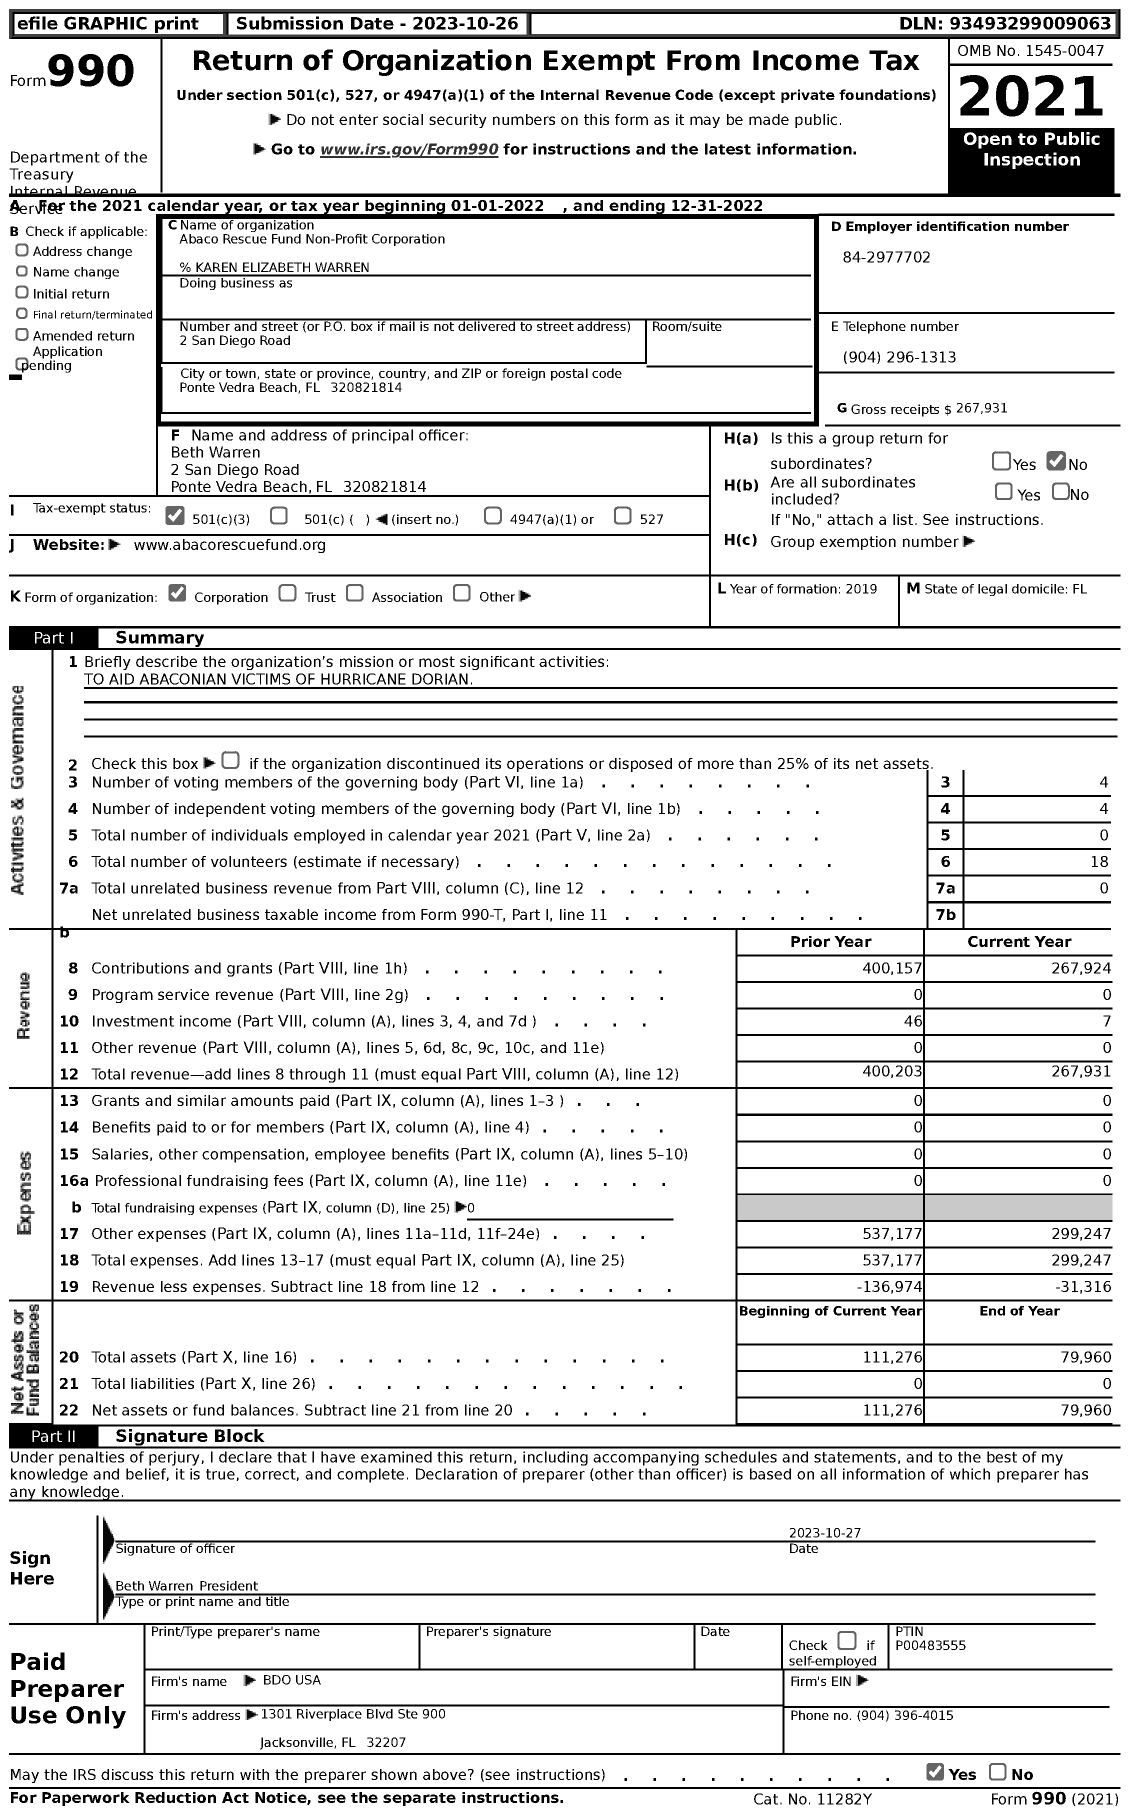 Image of first page of 2022 Form 990 for Abaco Rescue Fund Non-Profit Corporation